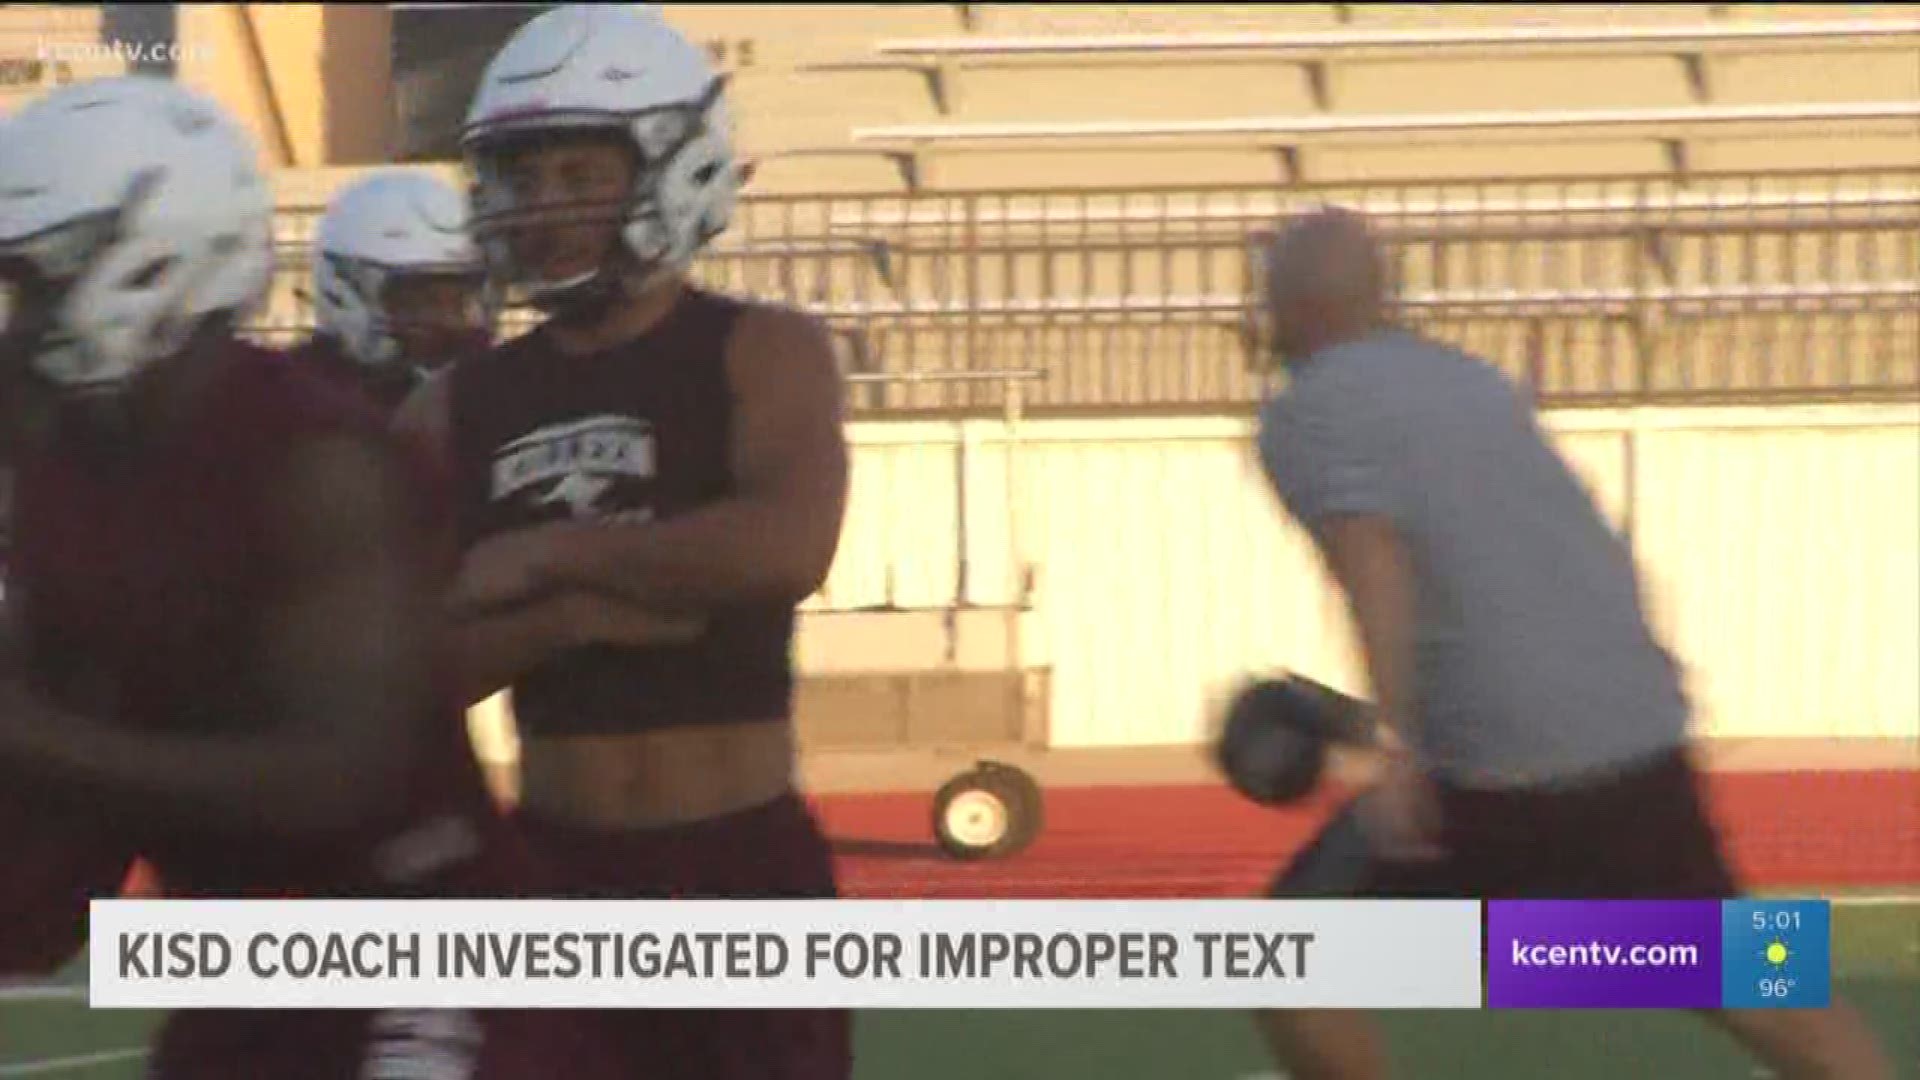 An update on a former Killeen High School coach who allegedly sent inappropriate texts to a 17-year-old student. 